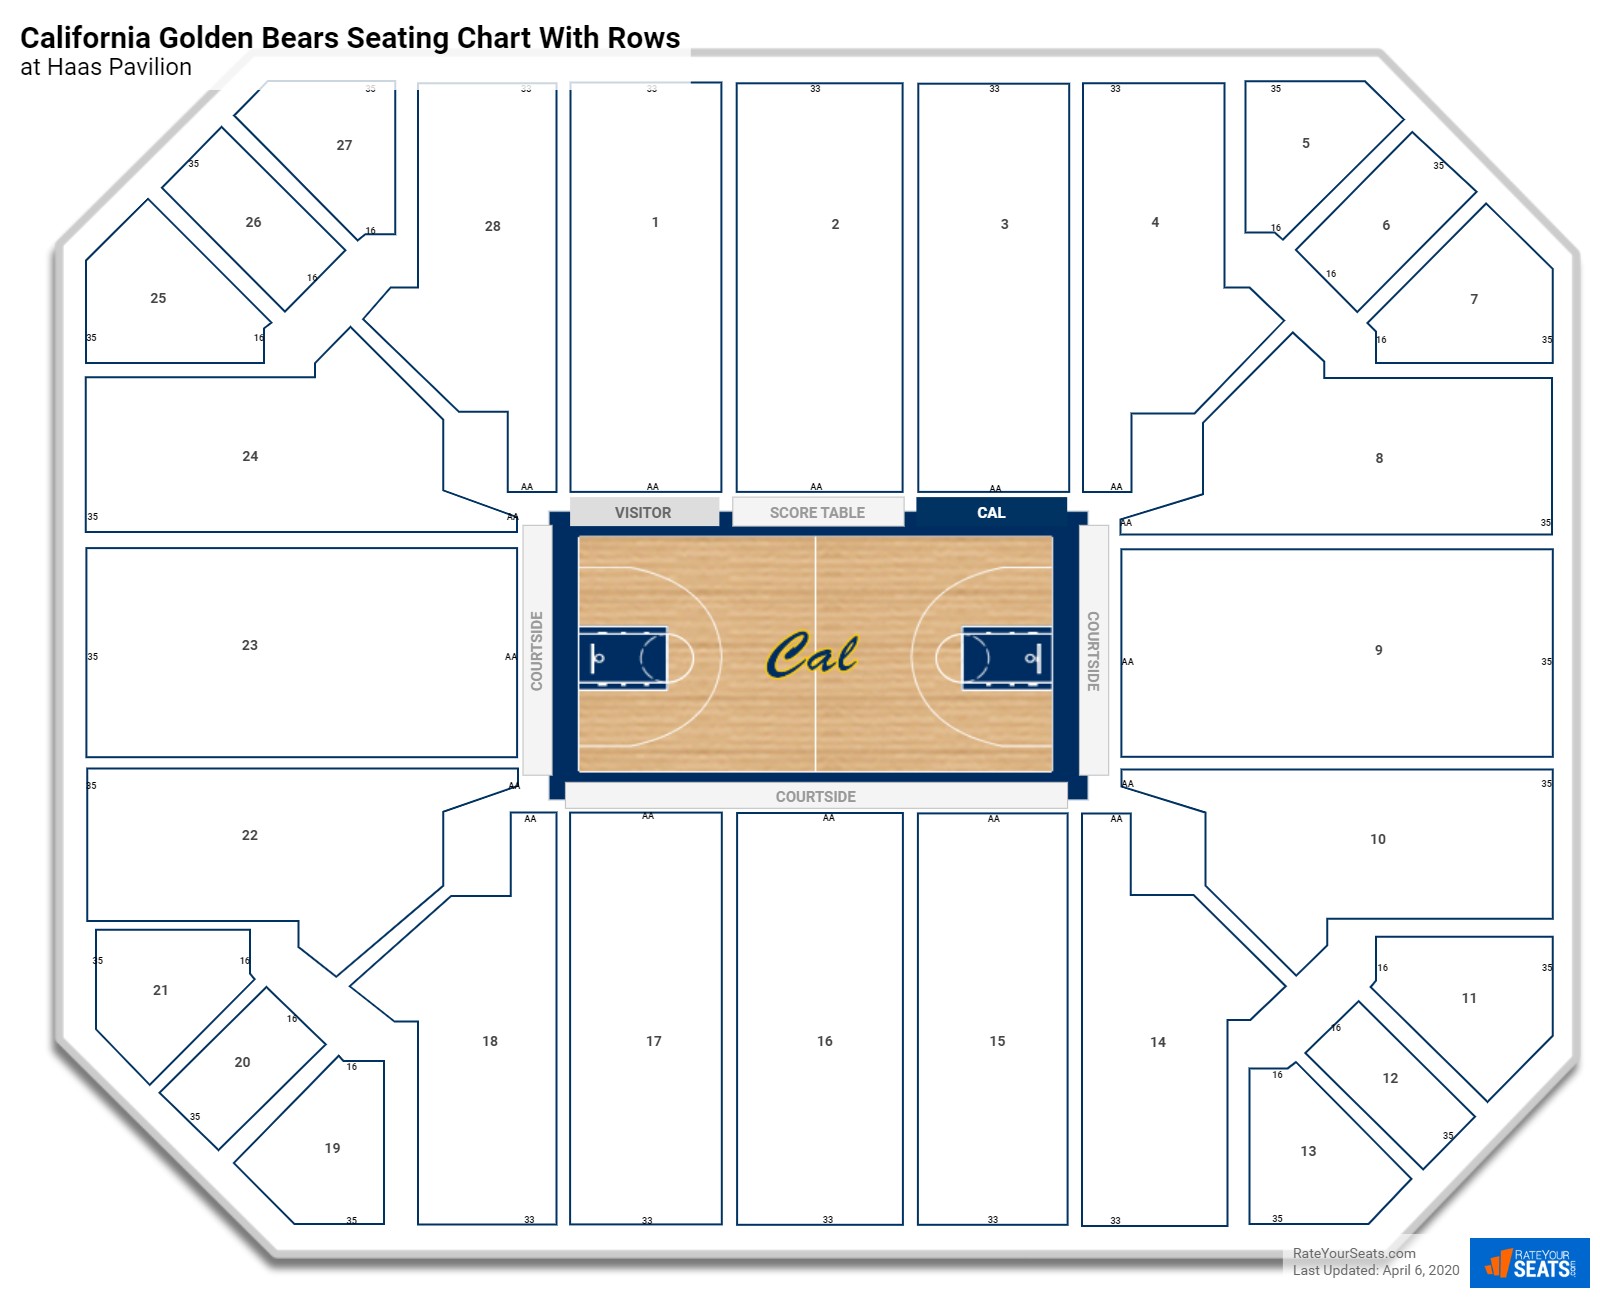 Haas Pavilion seating chart with row numbers